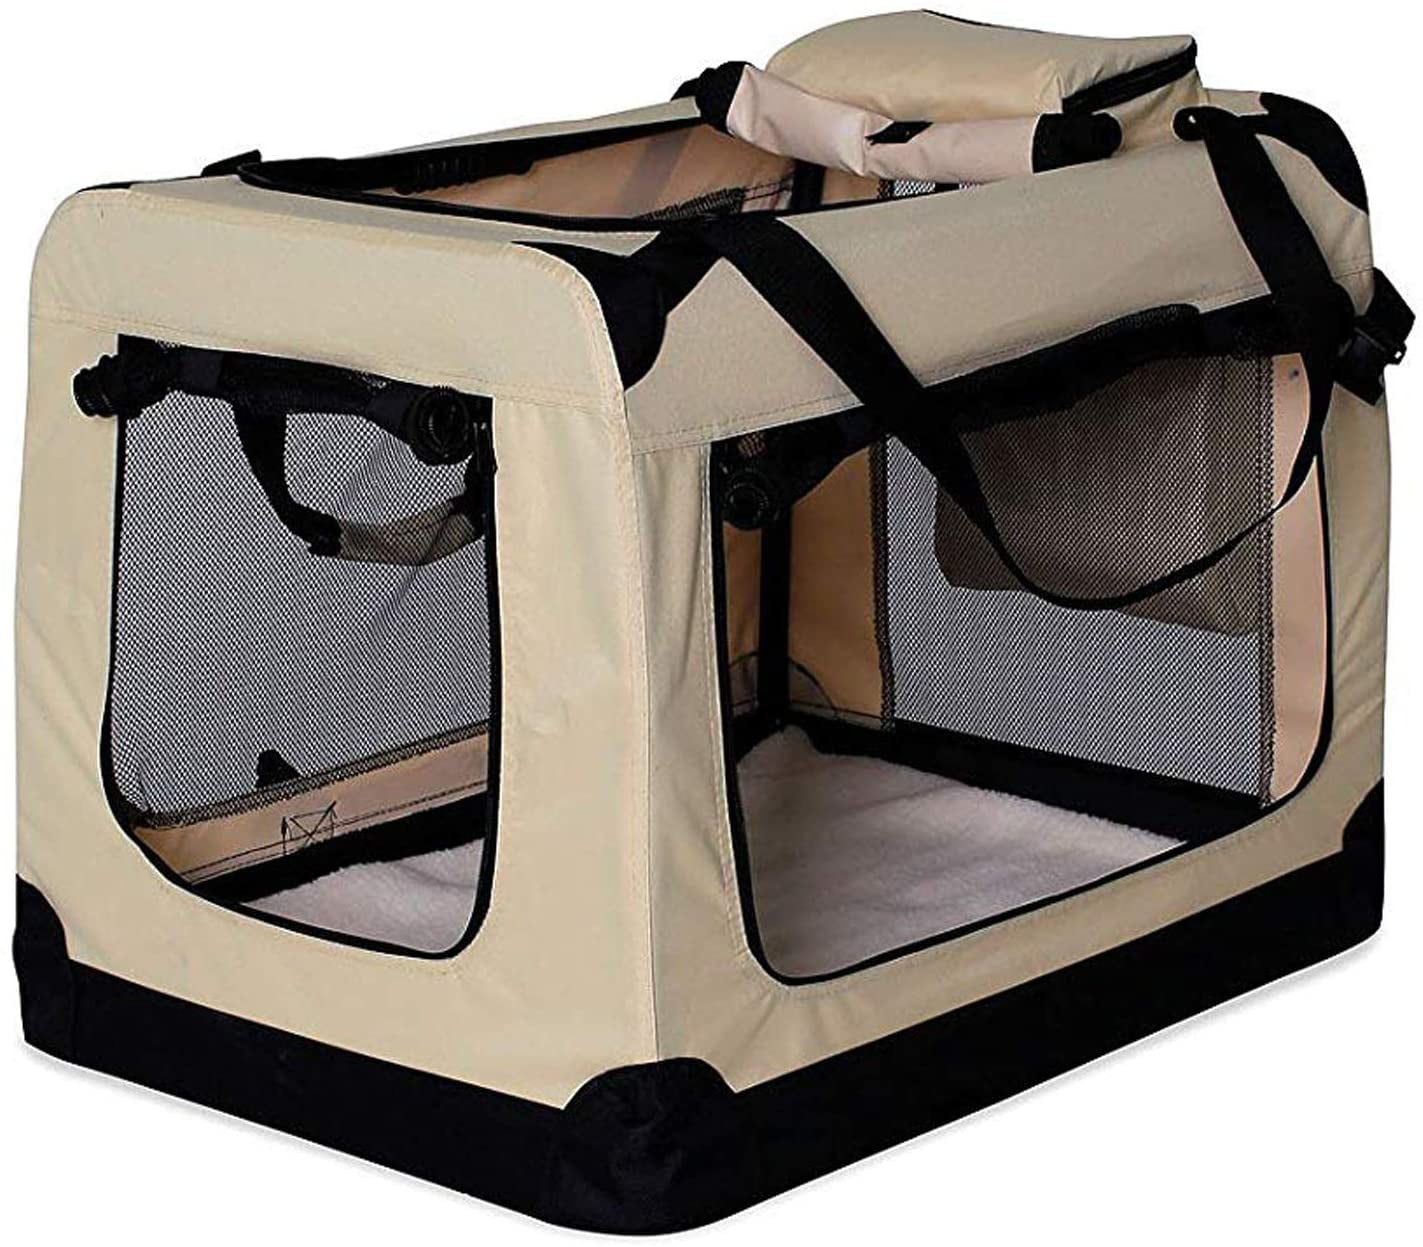 Pet Dog Cat Puppy Portable Travel Carry Carrier Tote Cage Bag Crates Kennel UK 